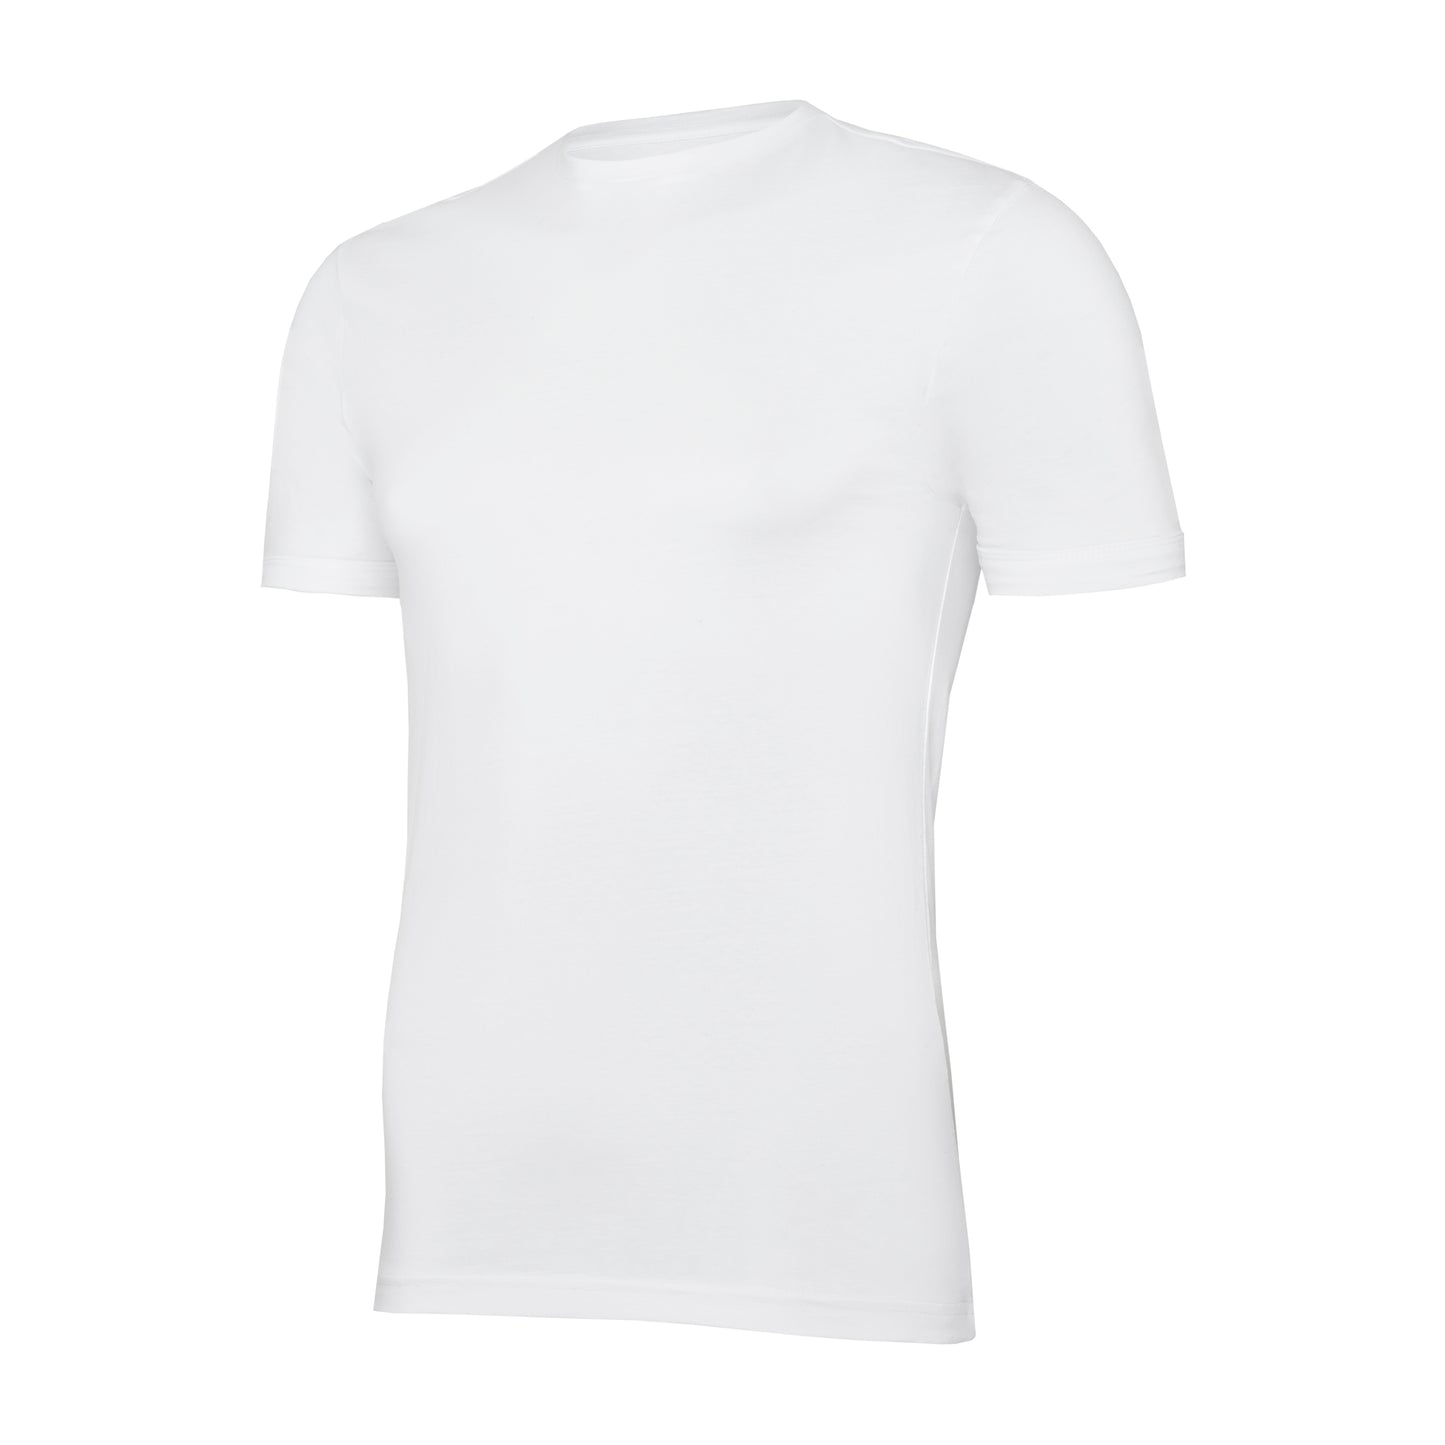 Round tight neck, white, slim fit, T-shirt – pack of 2 or 4 tees